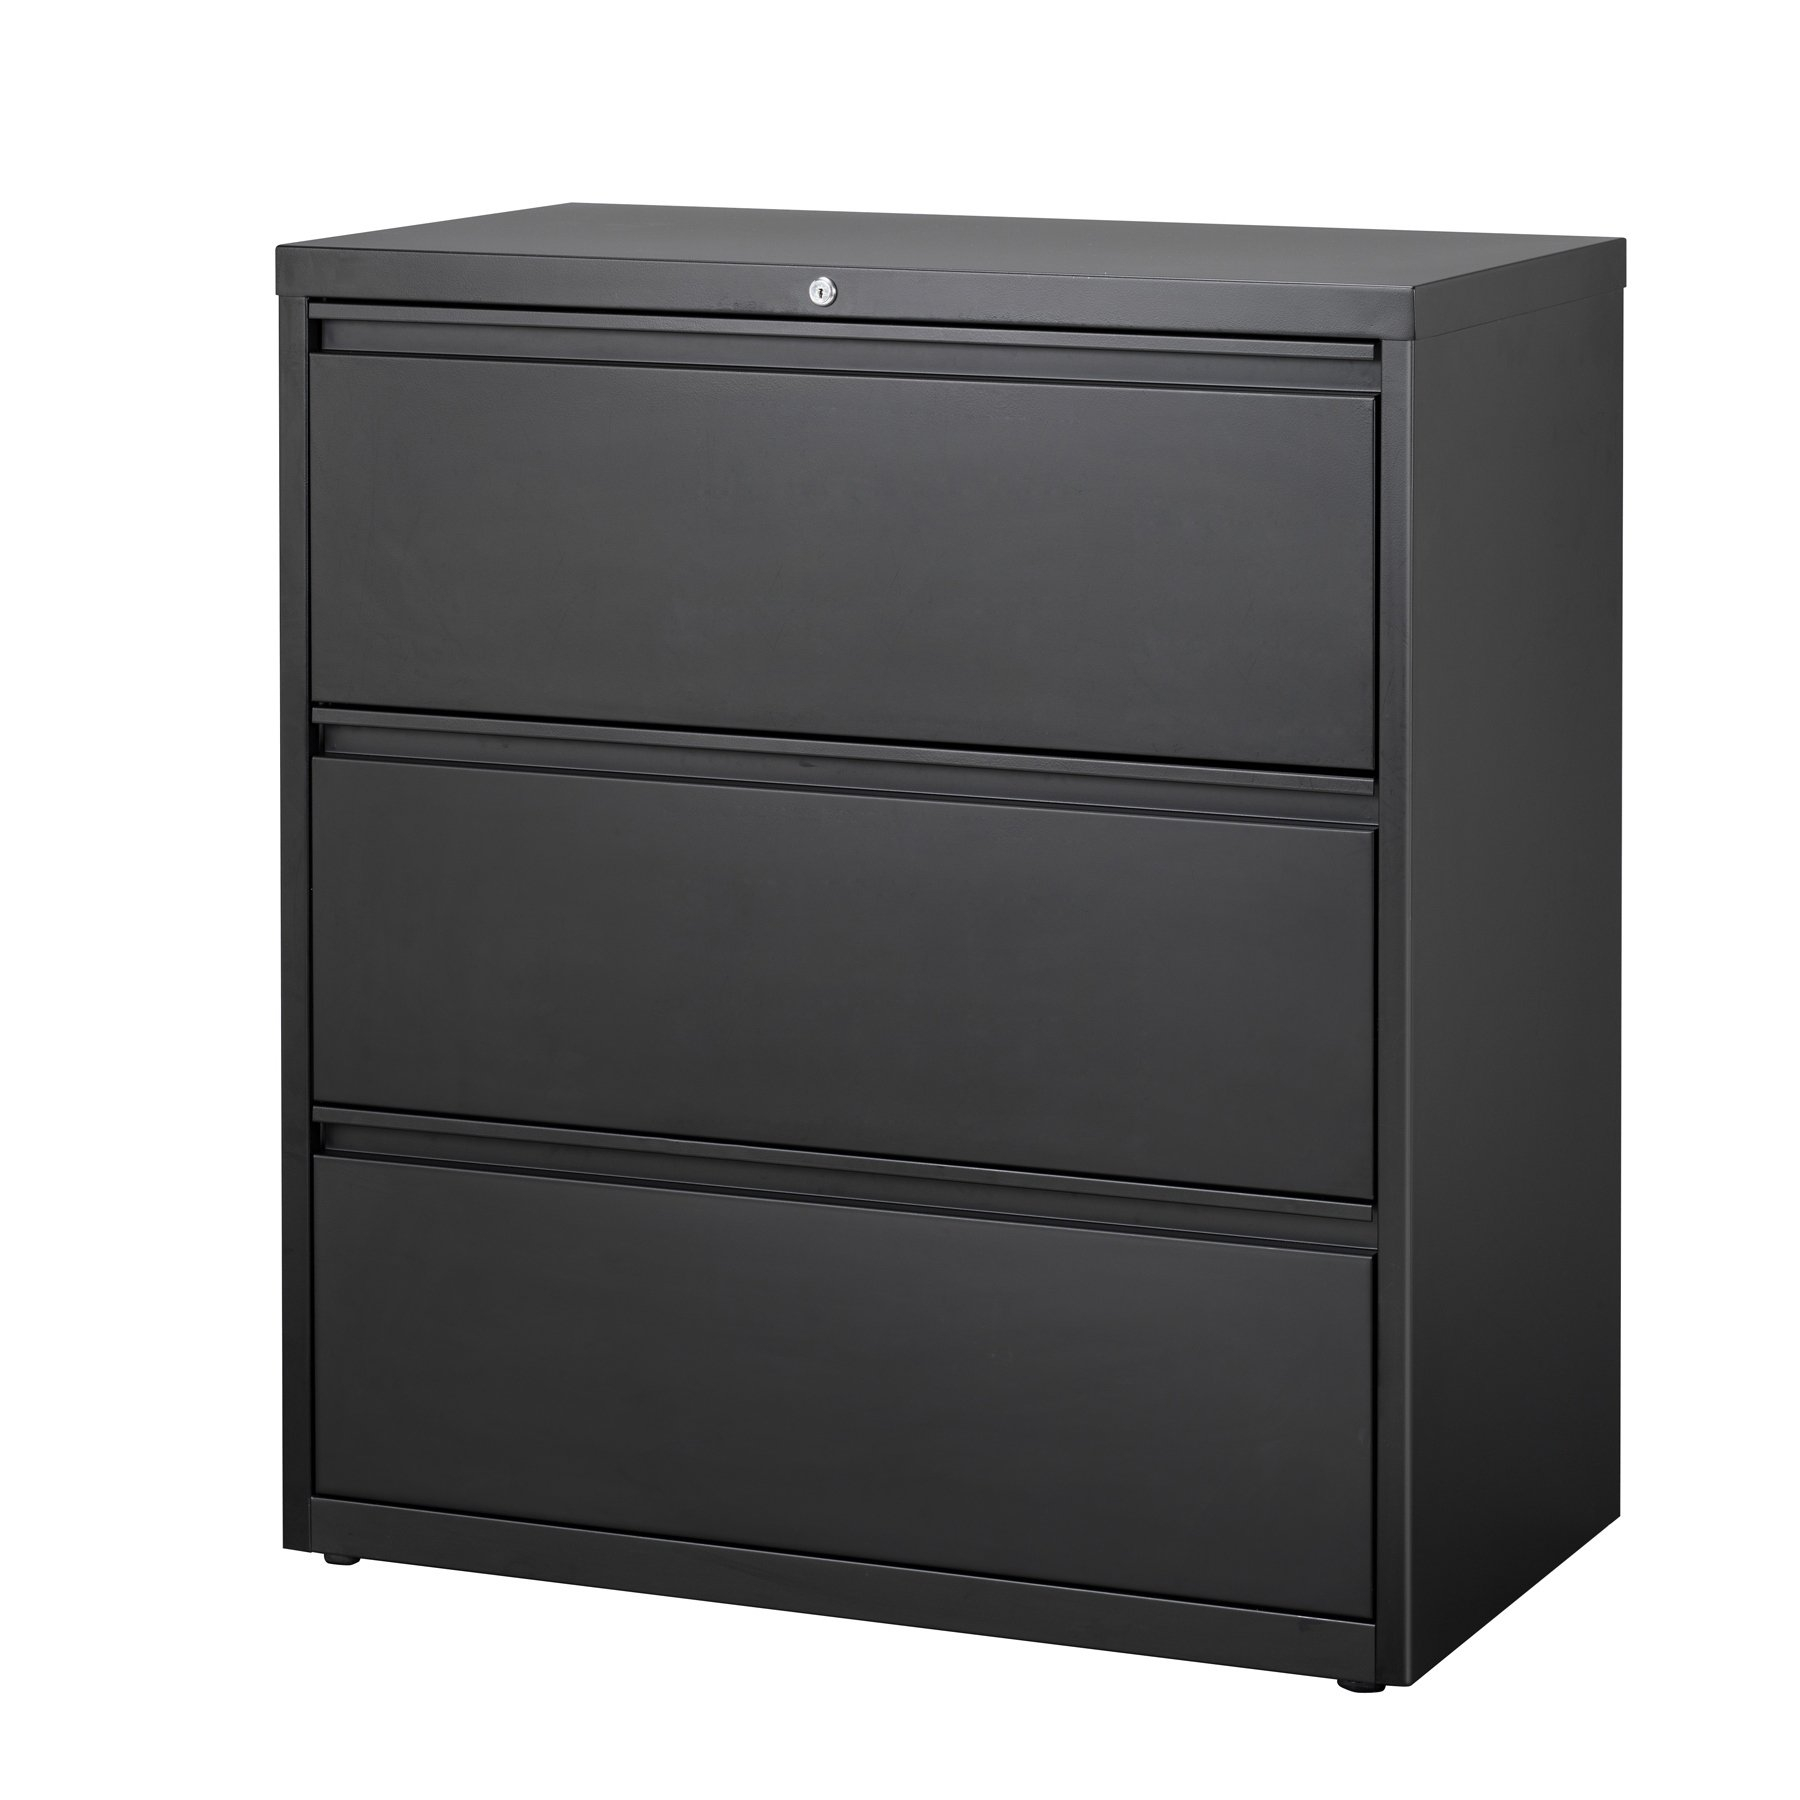 Hl8000 Series 36 Inch Wide 3 Drawer Lateral File Cabinet Black pertaining to size 1800 X 1800